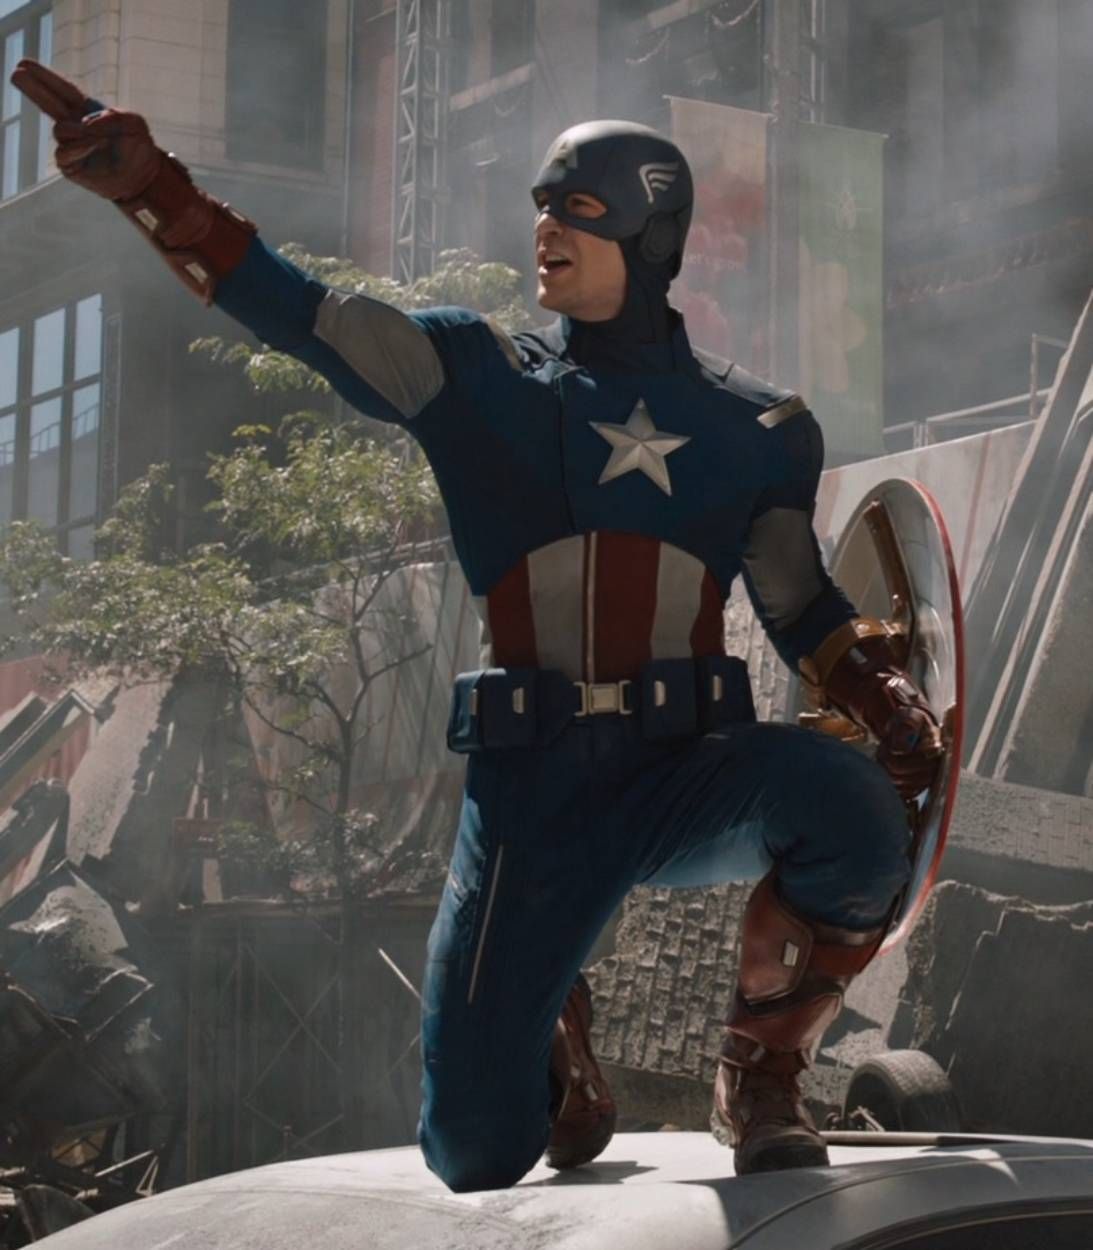 Captain America in the Battle of New York in The Avengers pic vertical